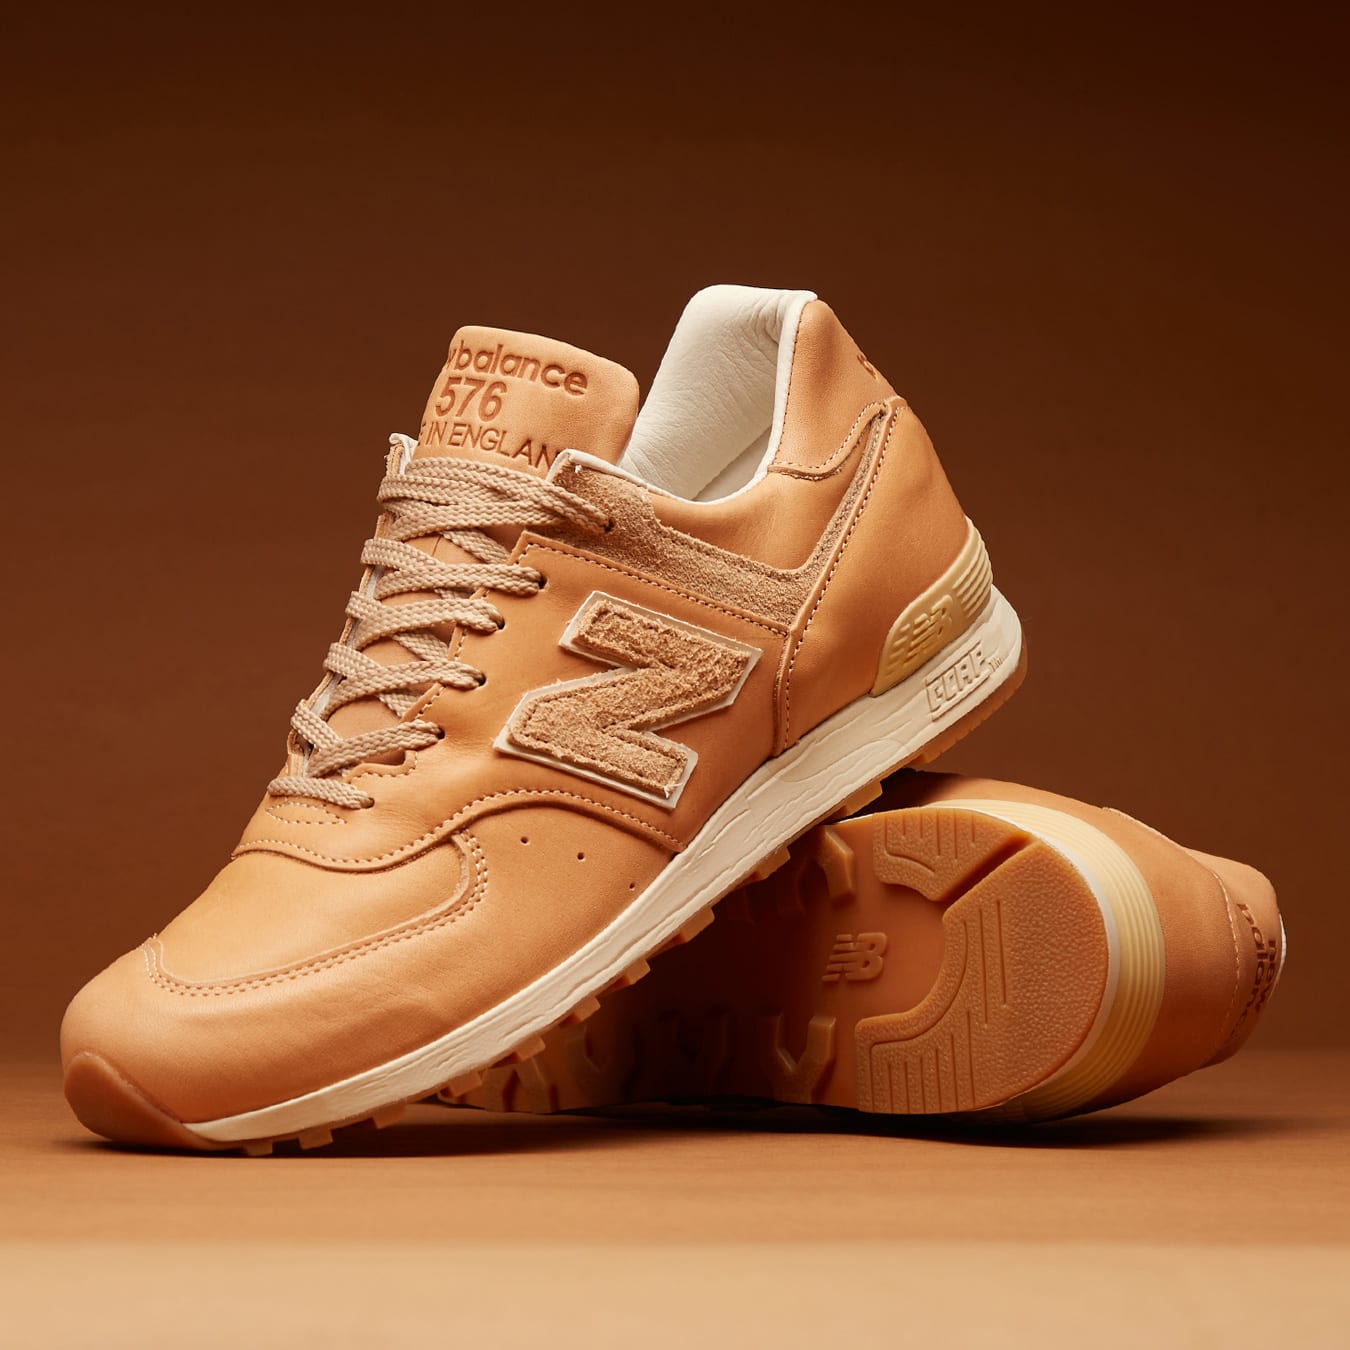 New Balance x Horween Leather Co. 576 